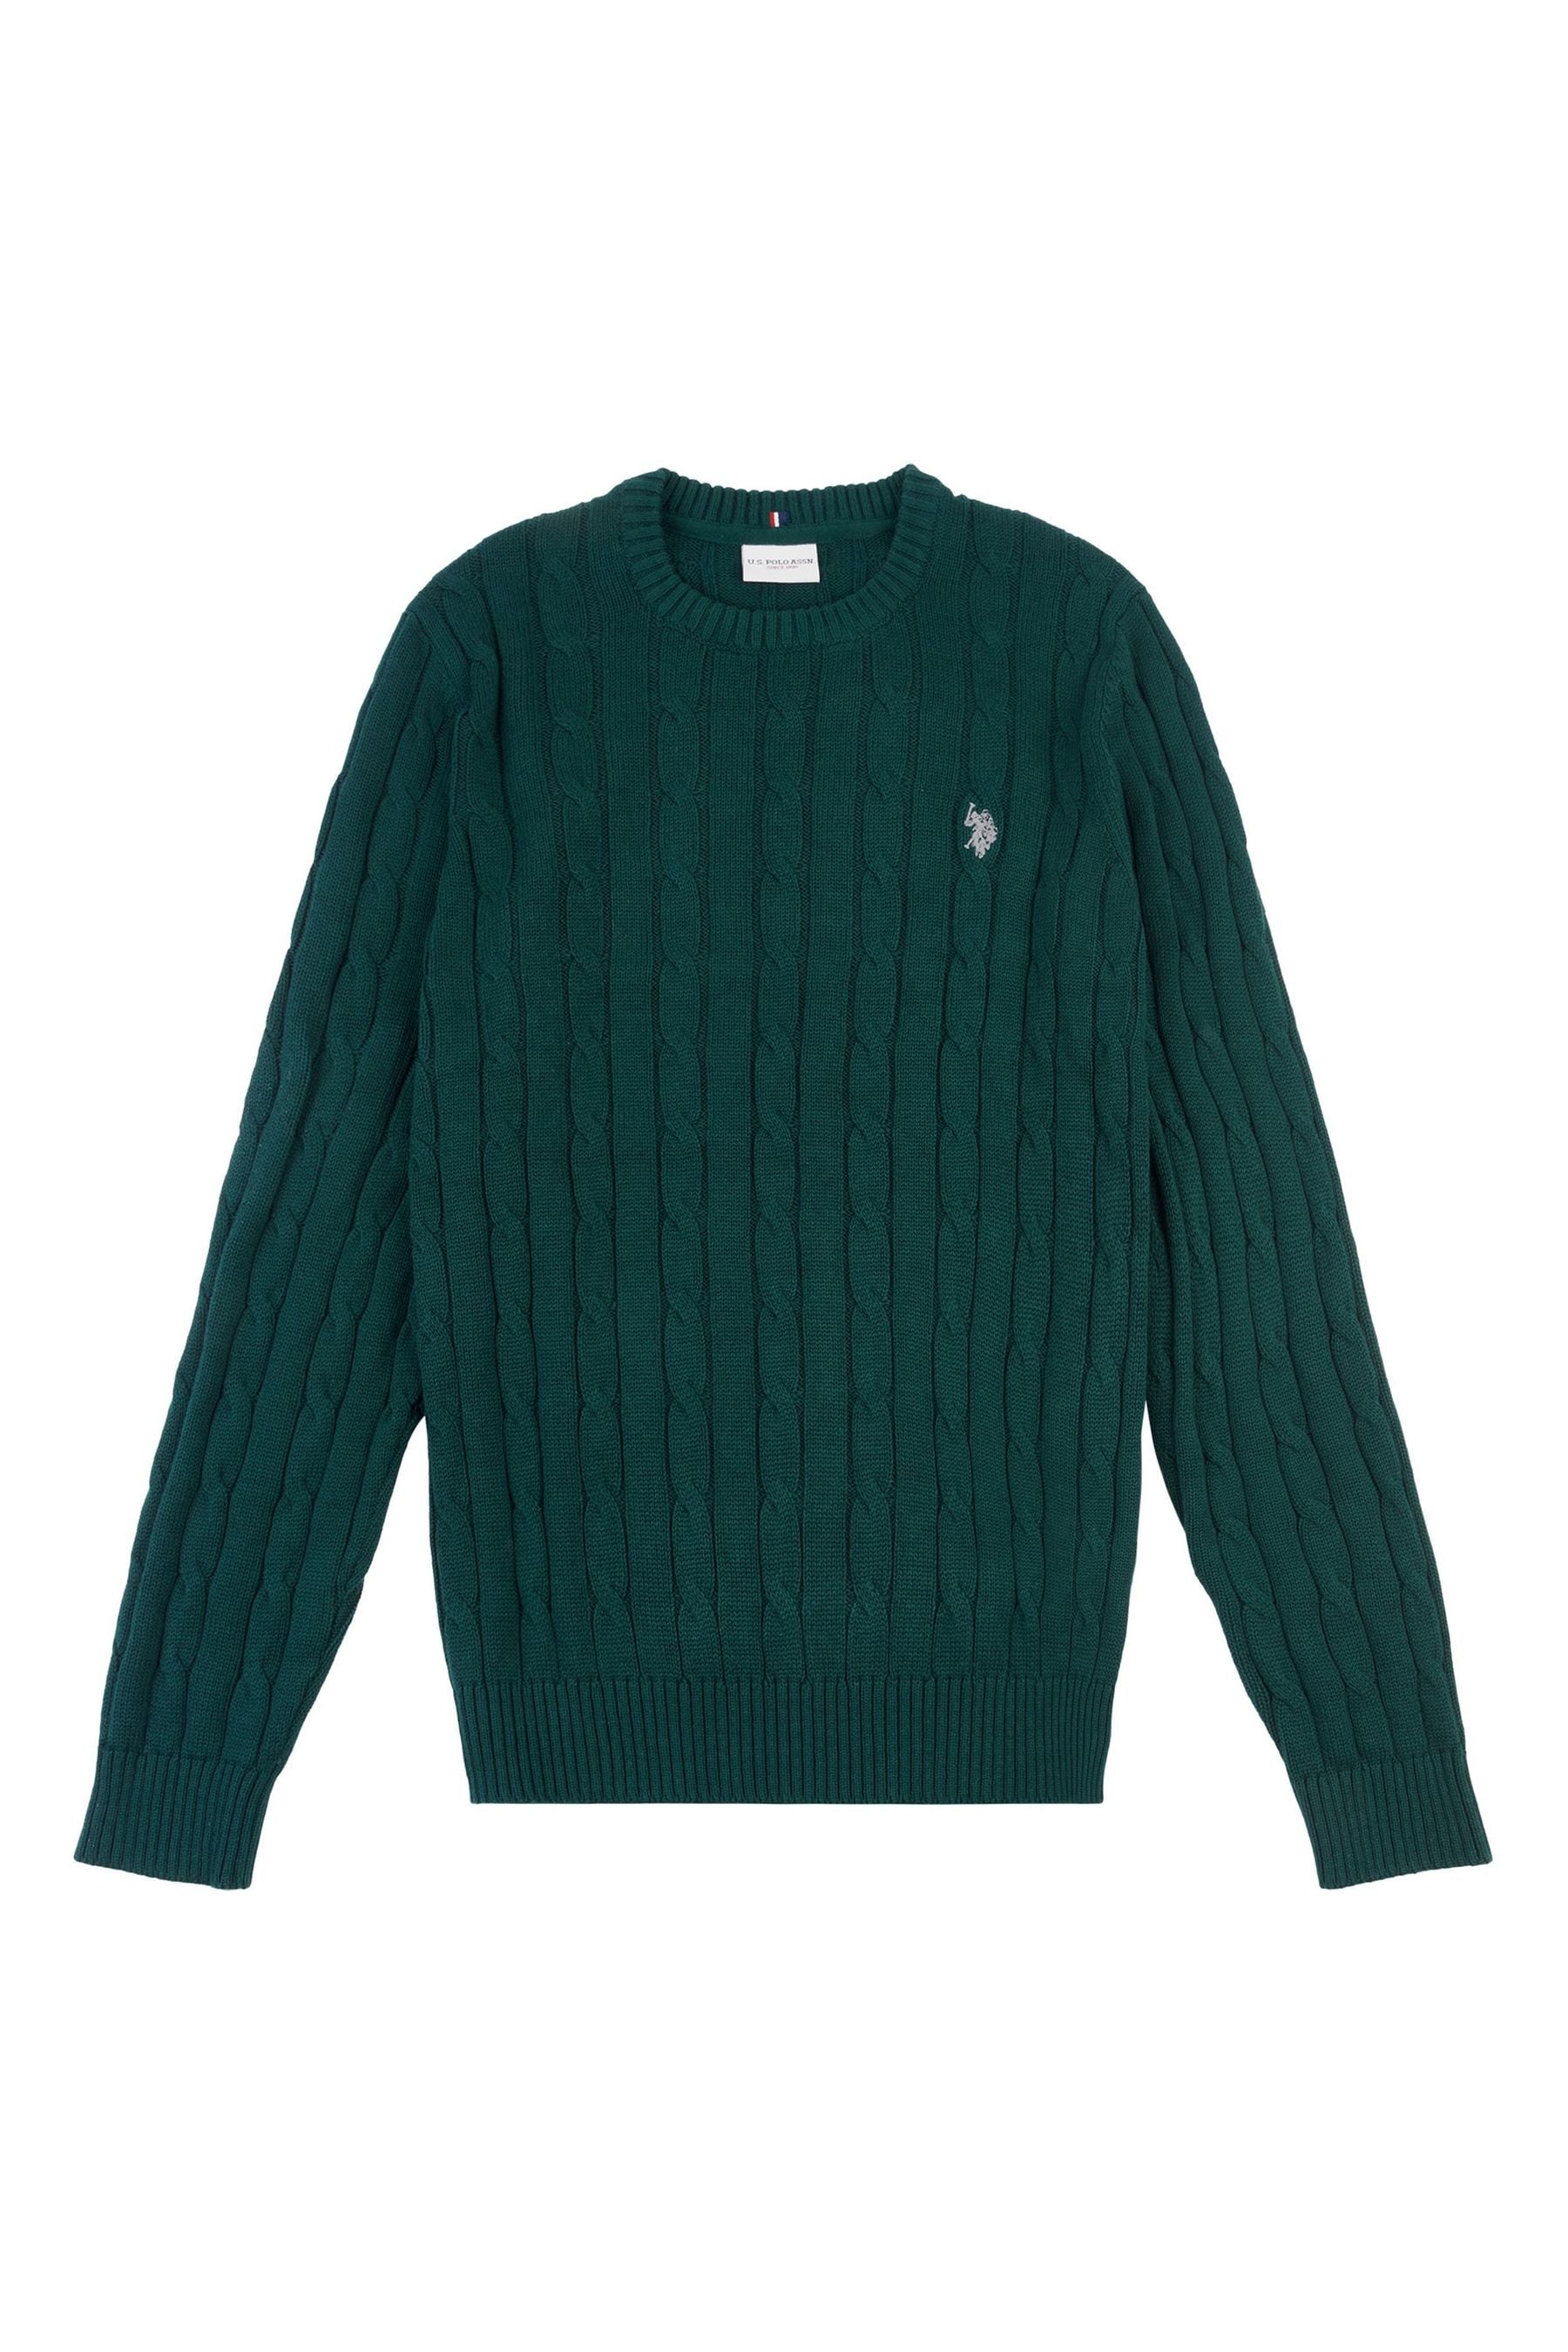 Buy U.S. Polo Assn. Mens Cable Knit Crew Neck Jumper from the Next UK ...